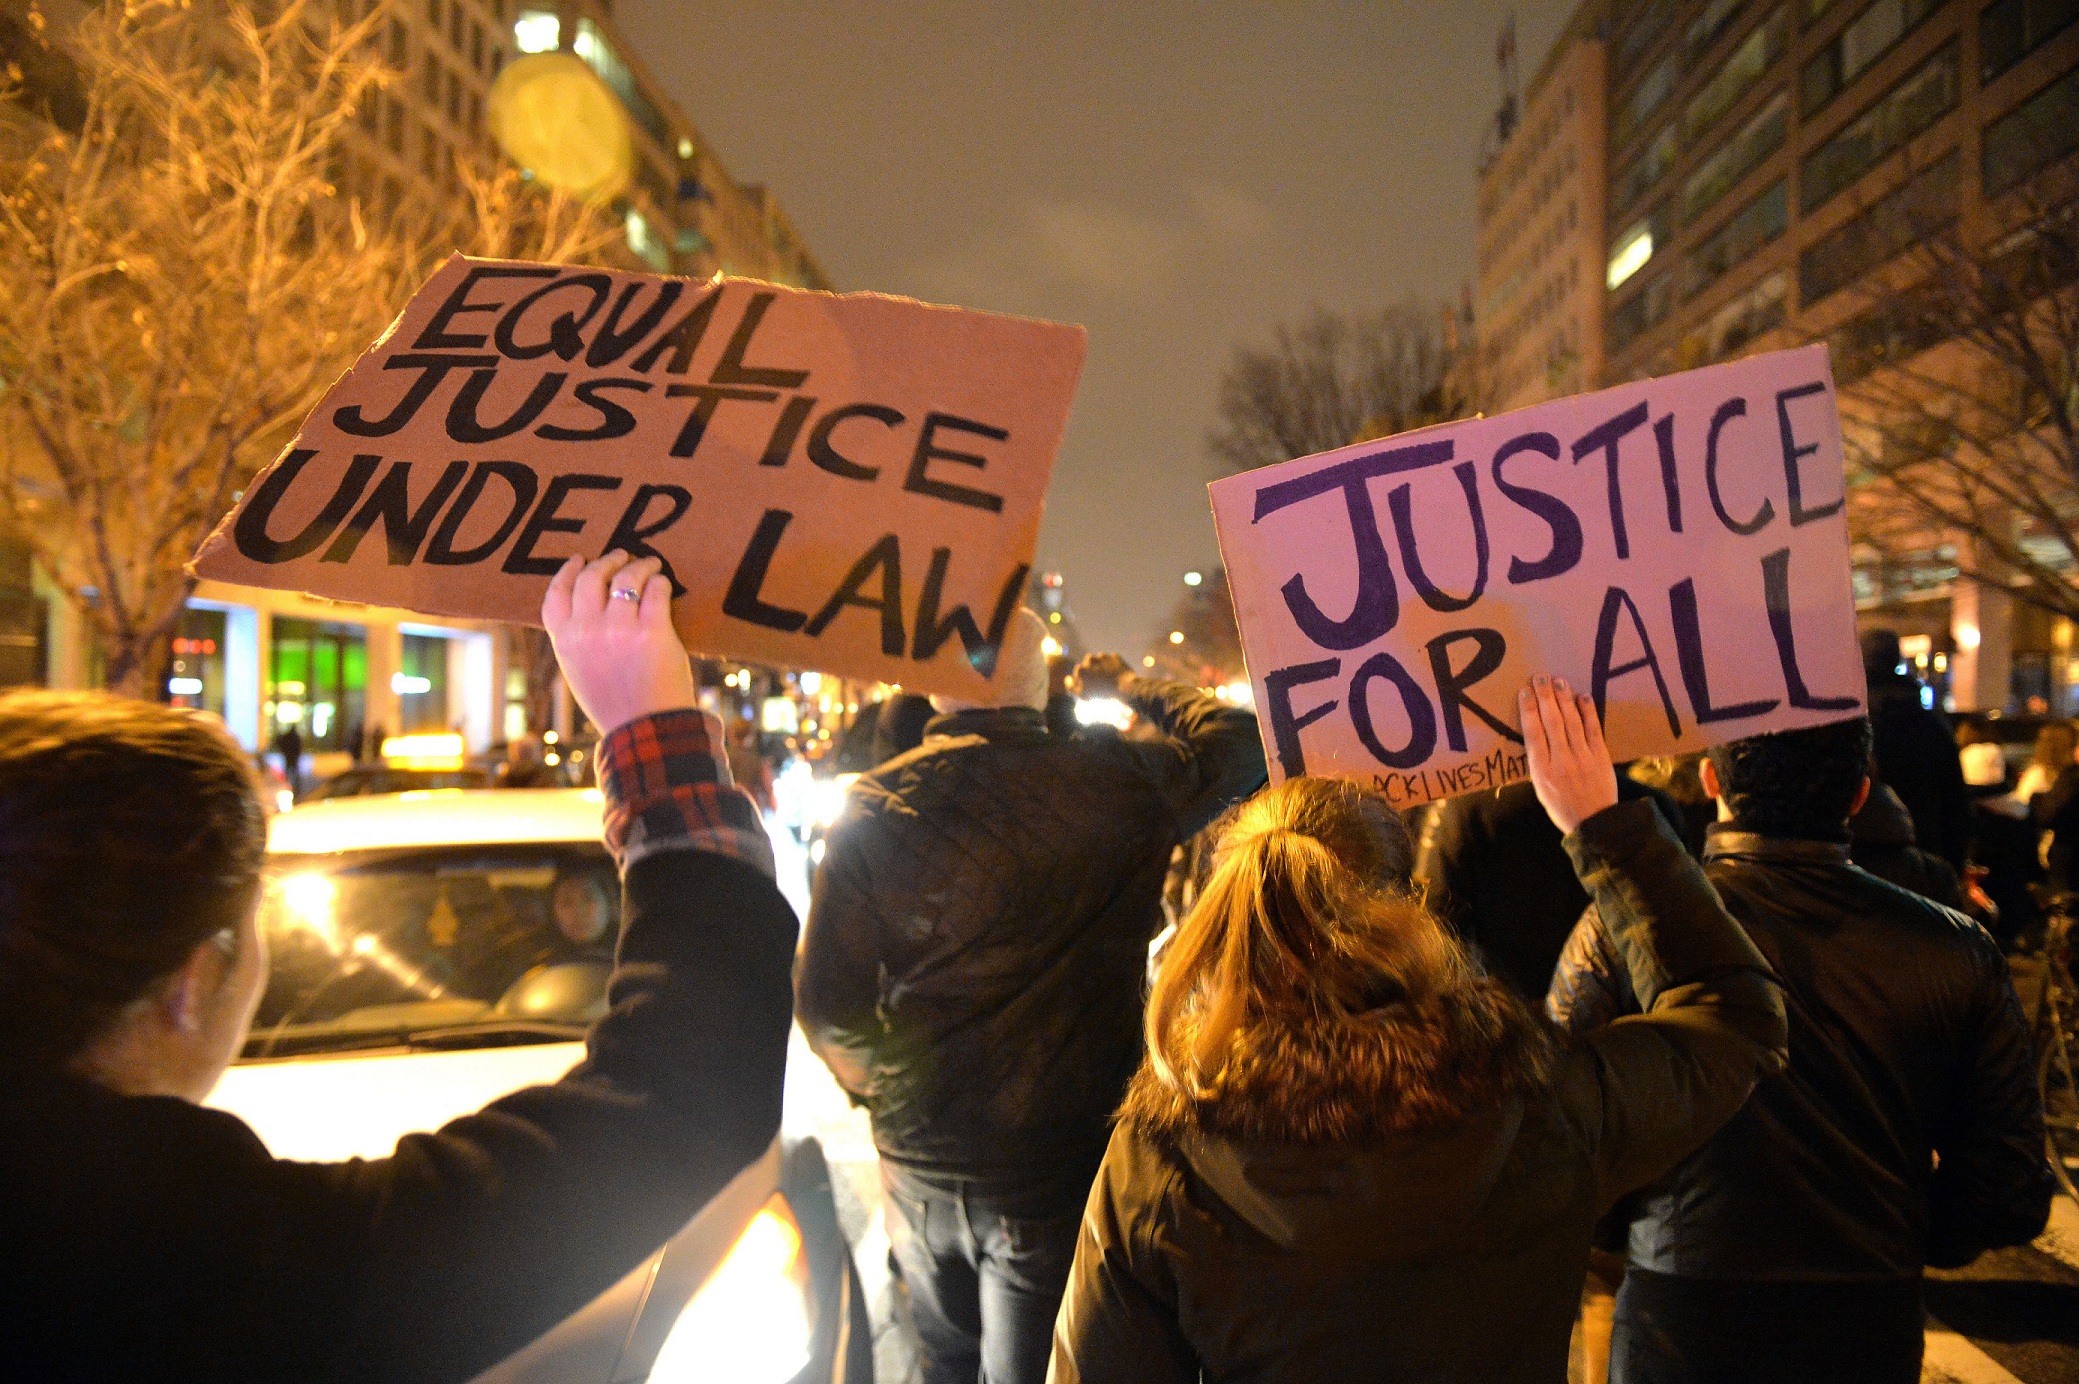 Protesters march holding banners in downtown Washington DC on December 05, 2014 during the third night of nationwide protests, after a grand jury decided not to charge a white police officer in the choking death of Eric Garner, a black man, days after a similar decision sparked renewed unrest in Missouri. Eric Garner died after being placed in a chokehold by New York police Officer Daniel Pantaleo while being arrested on suspicion of selling untaxed cigarettes in Staten Island
